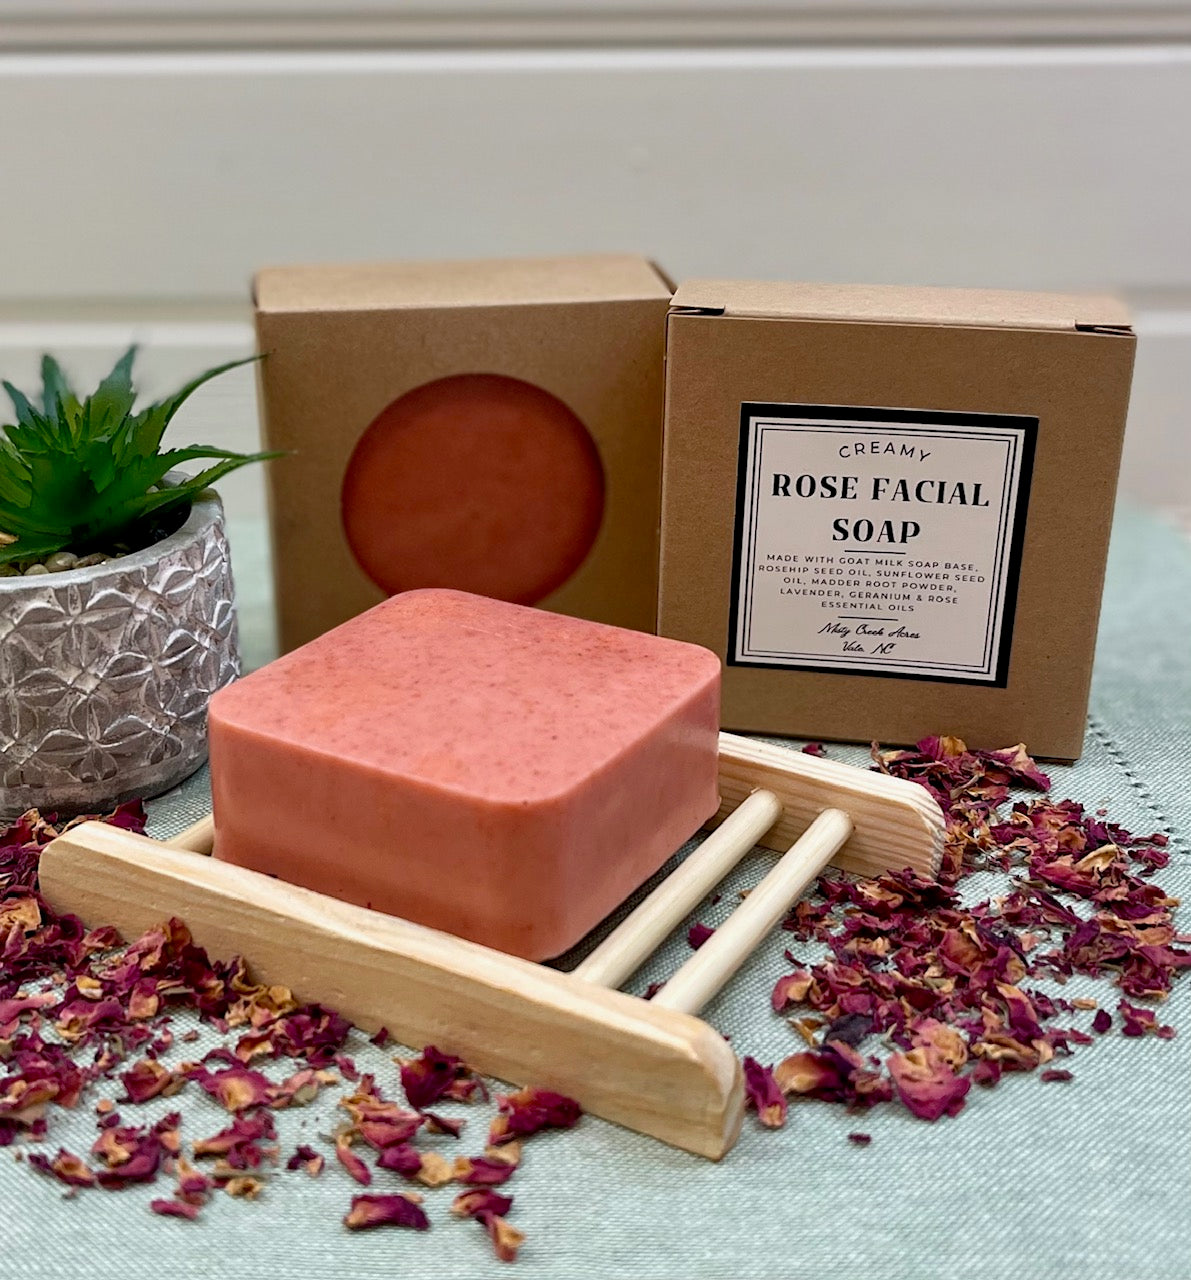 Rose facial soap, rose goat milk soap, non toxic facial soap, non toxic soap, goat milk soap, natural oils soap, non toxic self care, non toxic bath products, gifts for mothers day, self care gift, North Carolina Homestead, North Carolina homemade soap, homemade goat milk soap